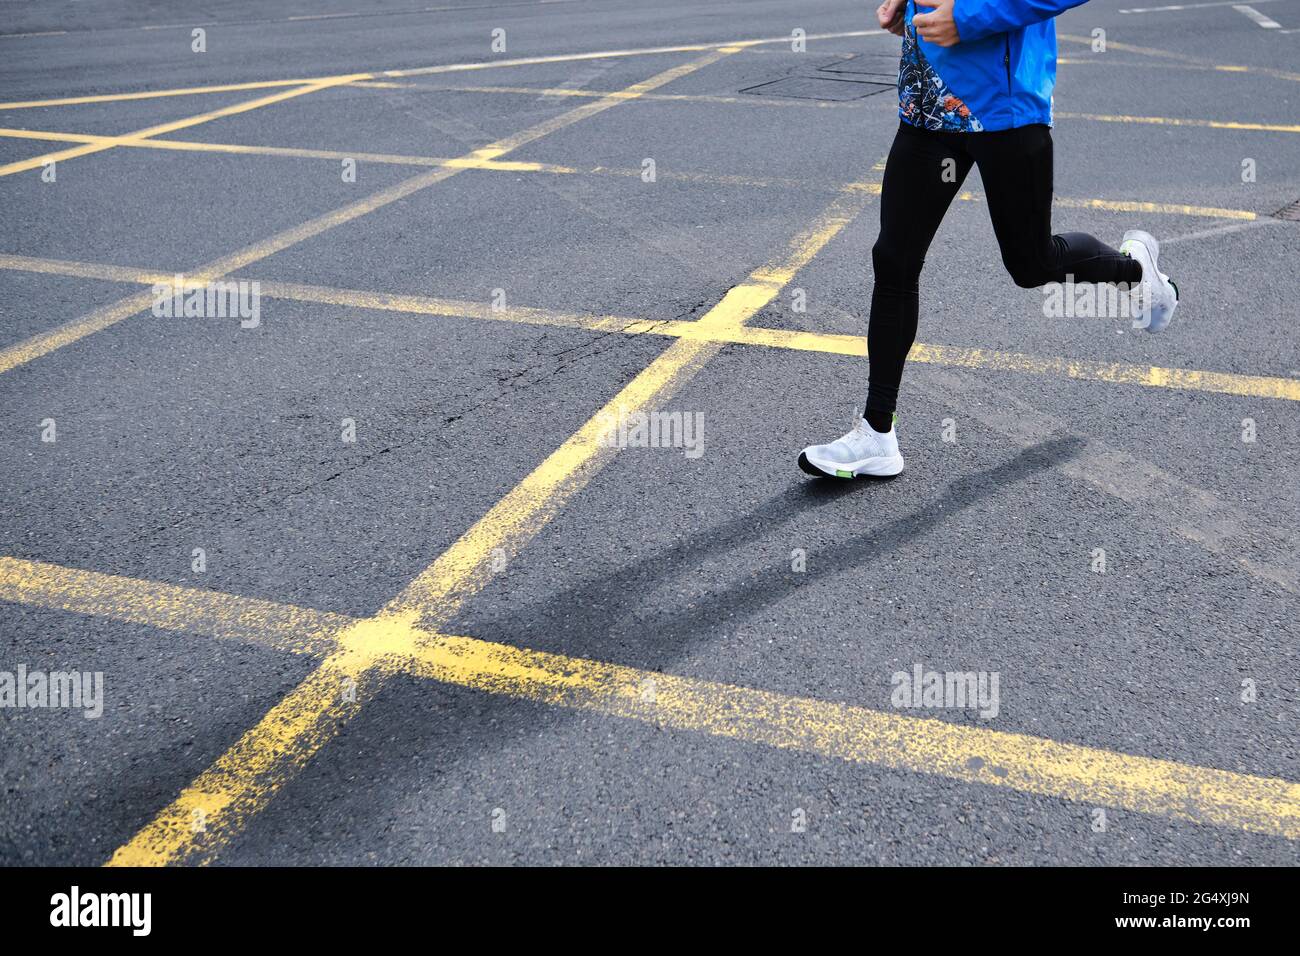 Man running on road in city Stock Photo